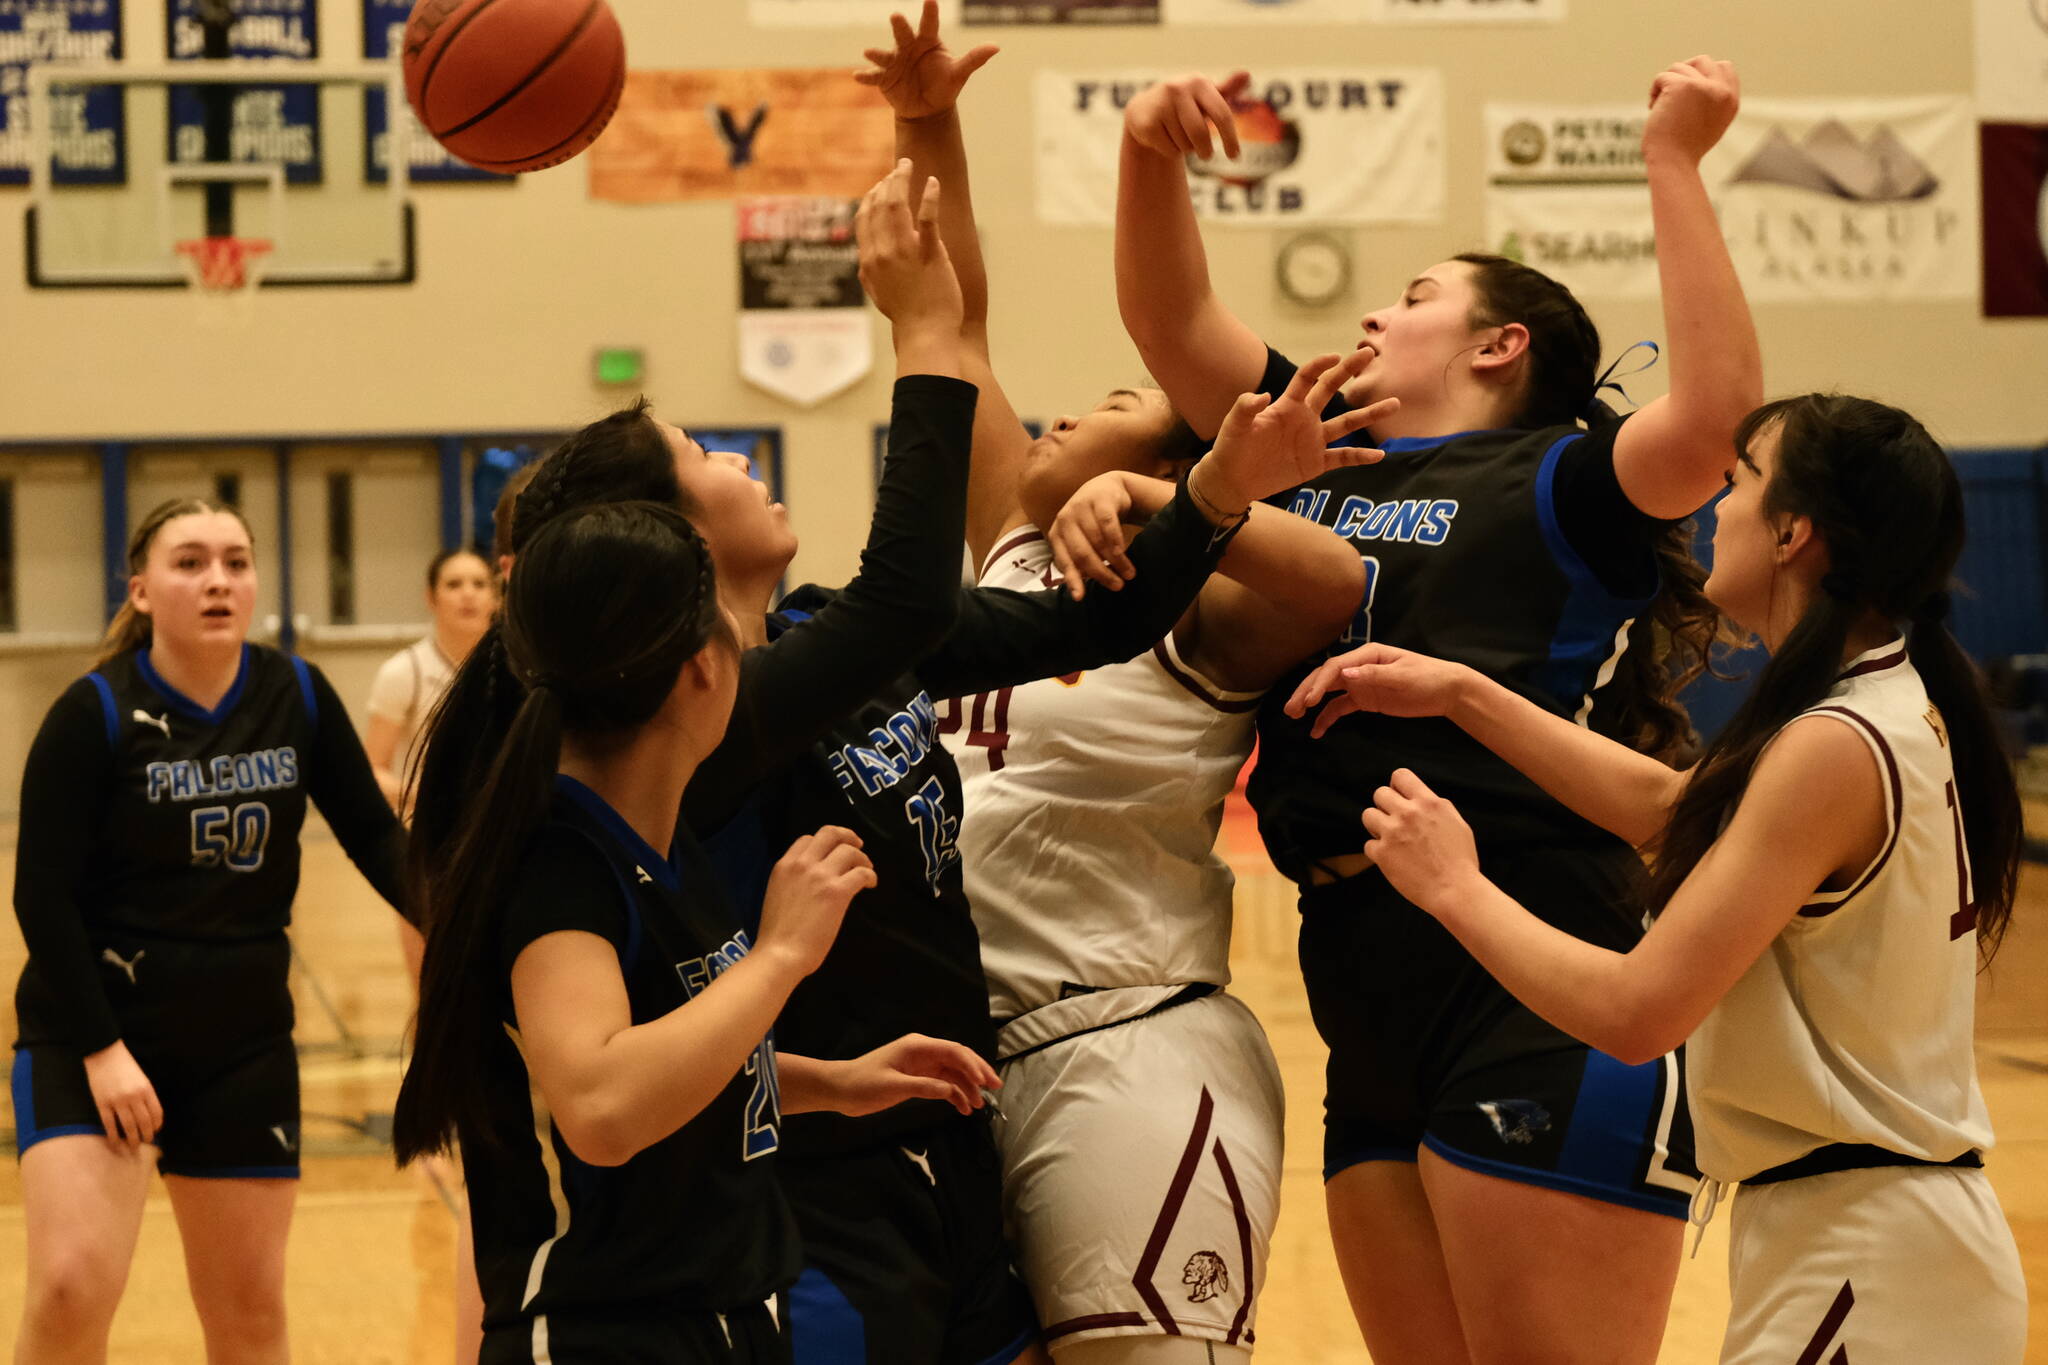 Thunder Mountain junior varsity and Hoonah varsity players battle for a rebound during the inaugural Elizabeth Peratrovich Women’s High School Basketball Invitational Tournament on Thursday at Thunder Mountain High School. The tournament runs through Saturday. (Klas Stolpe / For the Juneau Empire)